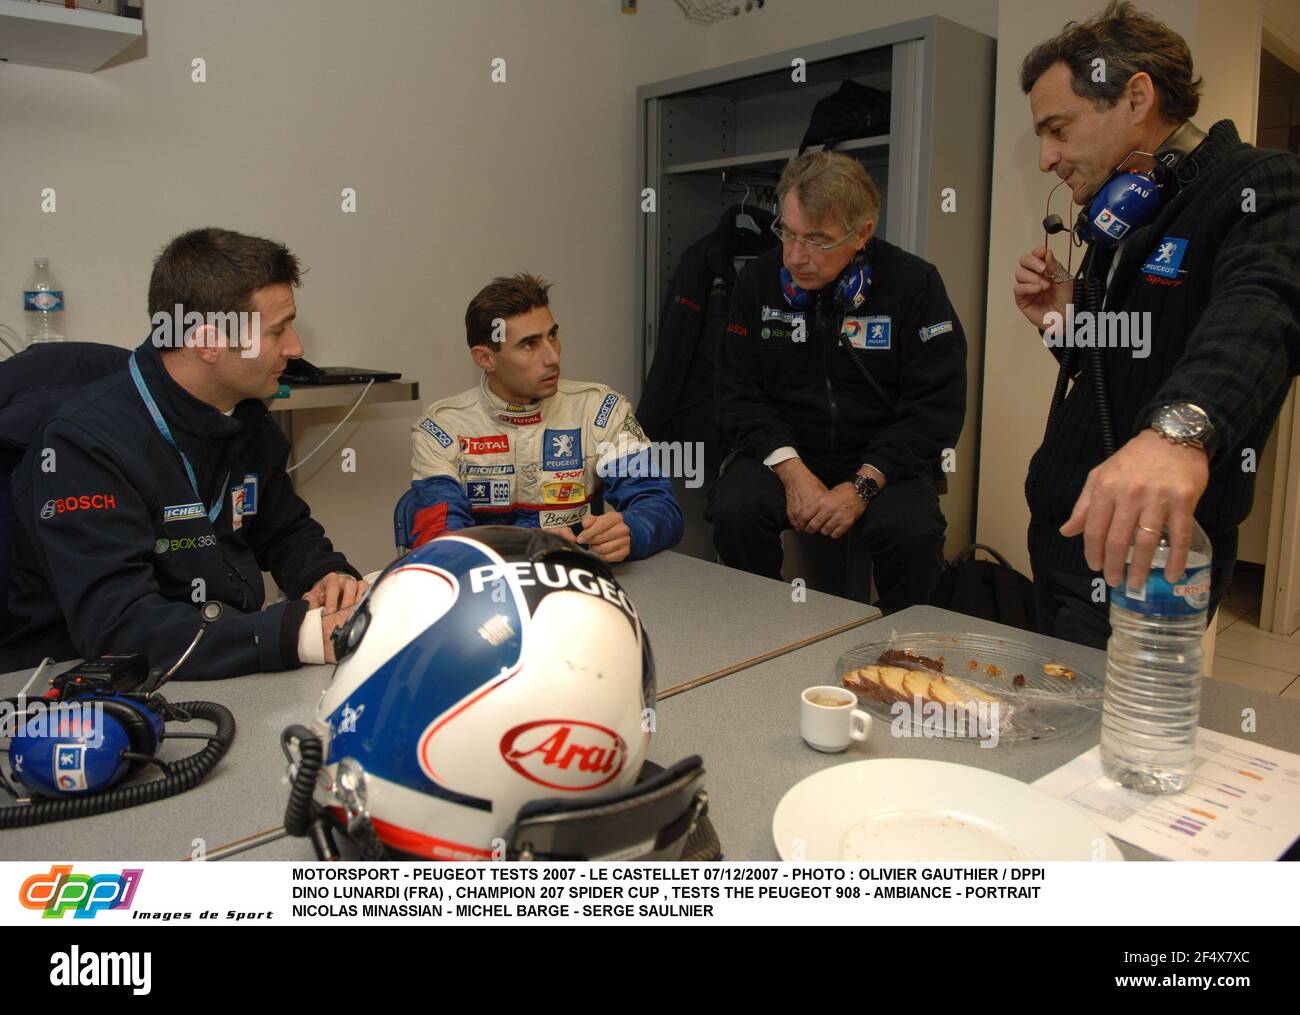 Peugeot 207 Being Tested By ARAI